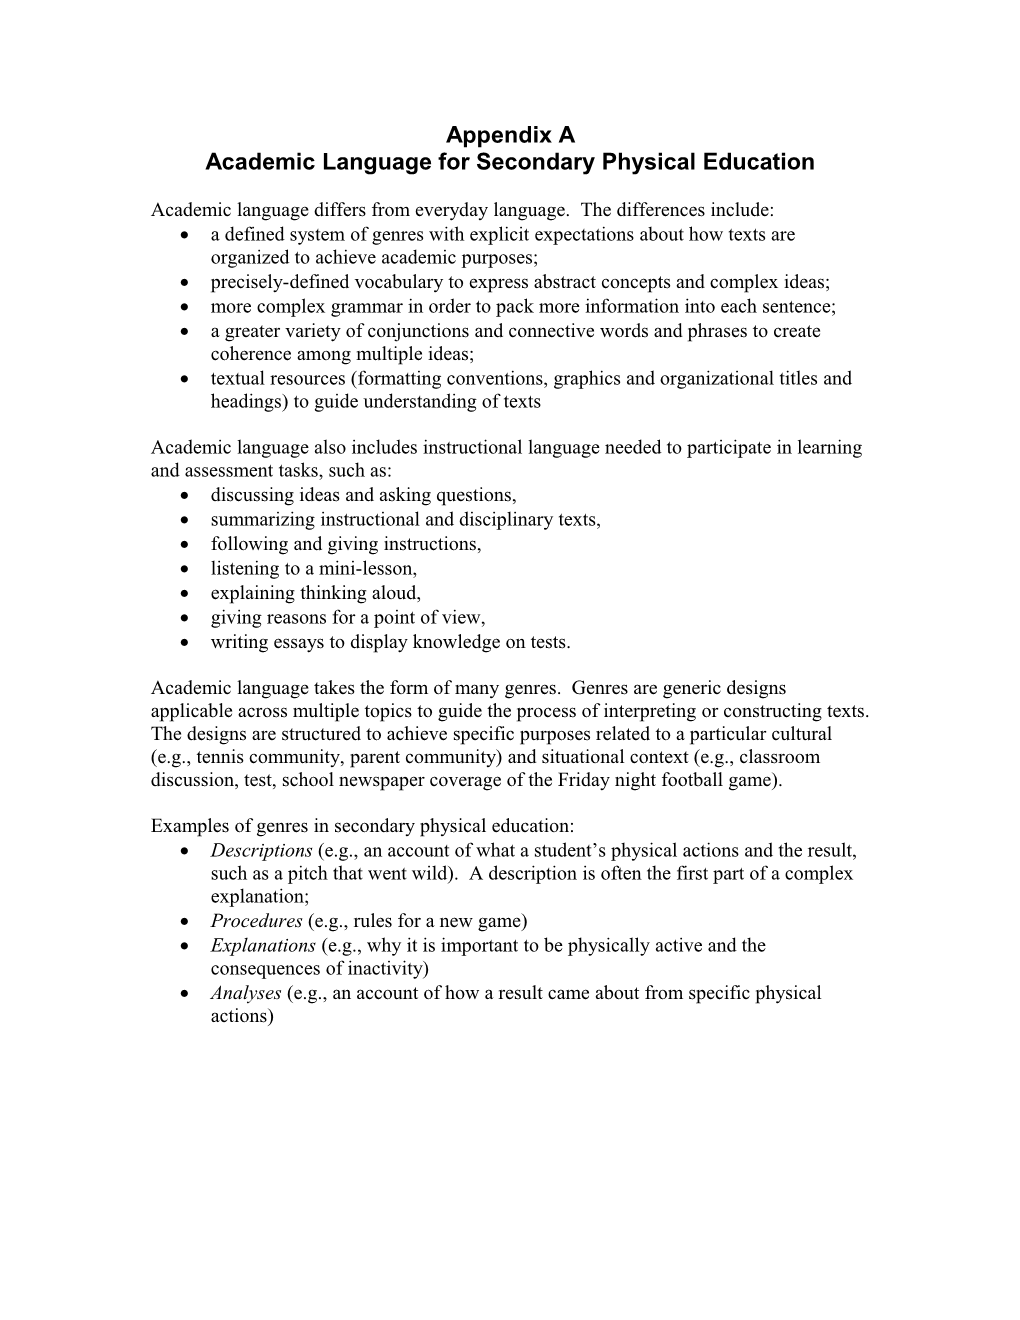 Academic Language for Secondary Physical Education